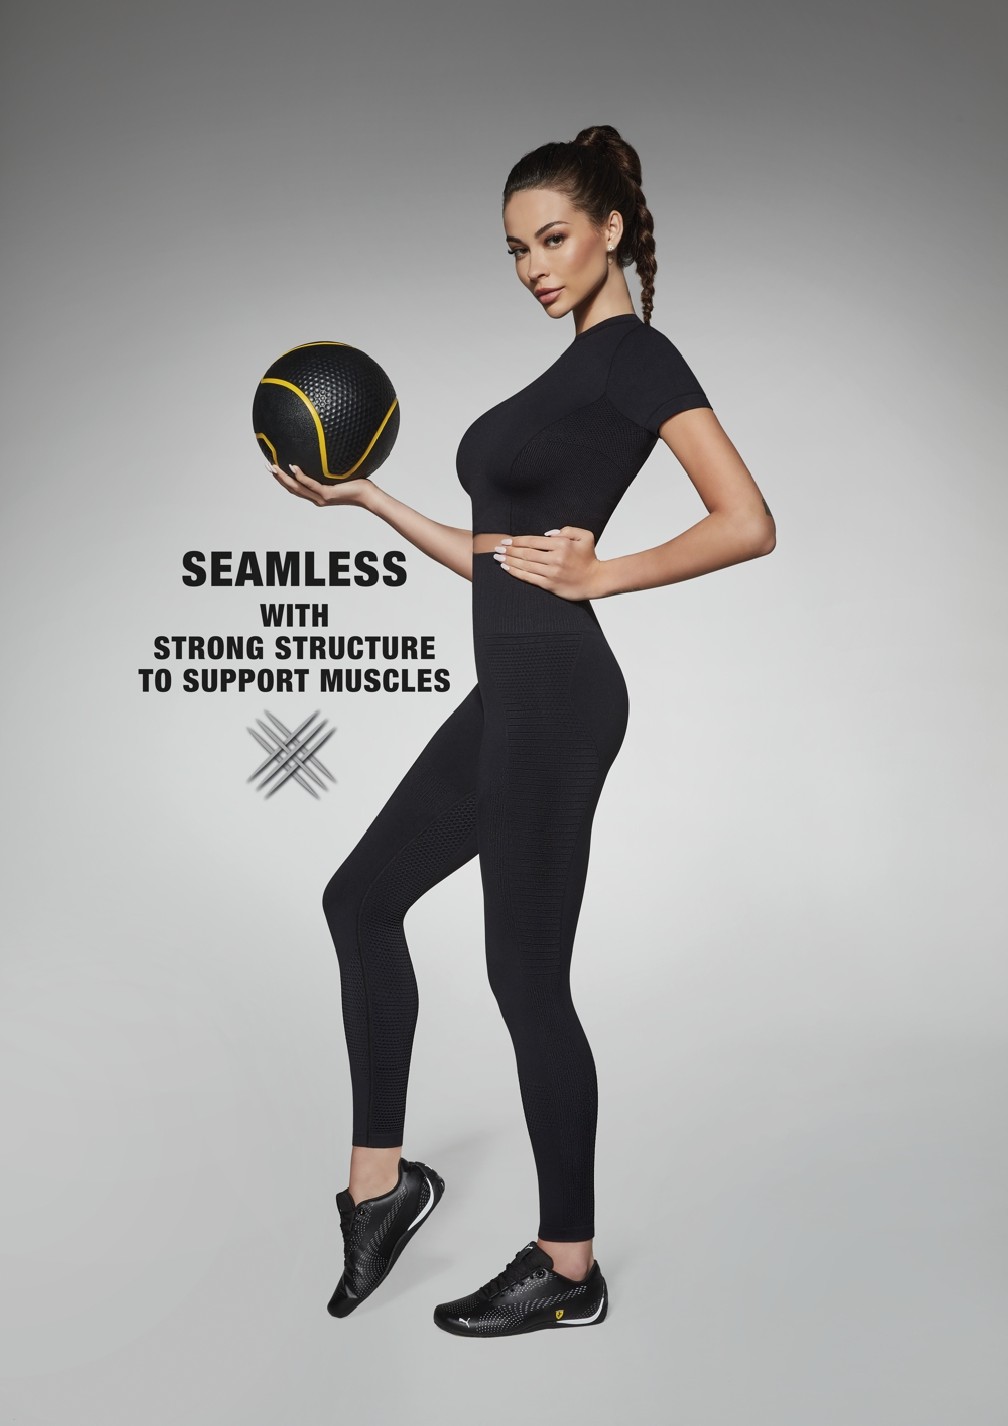 Bas Bleu CHALLENGE seamless sports leggings with a special fabric structure to support muscles